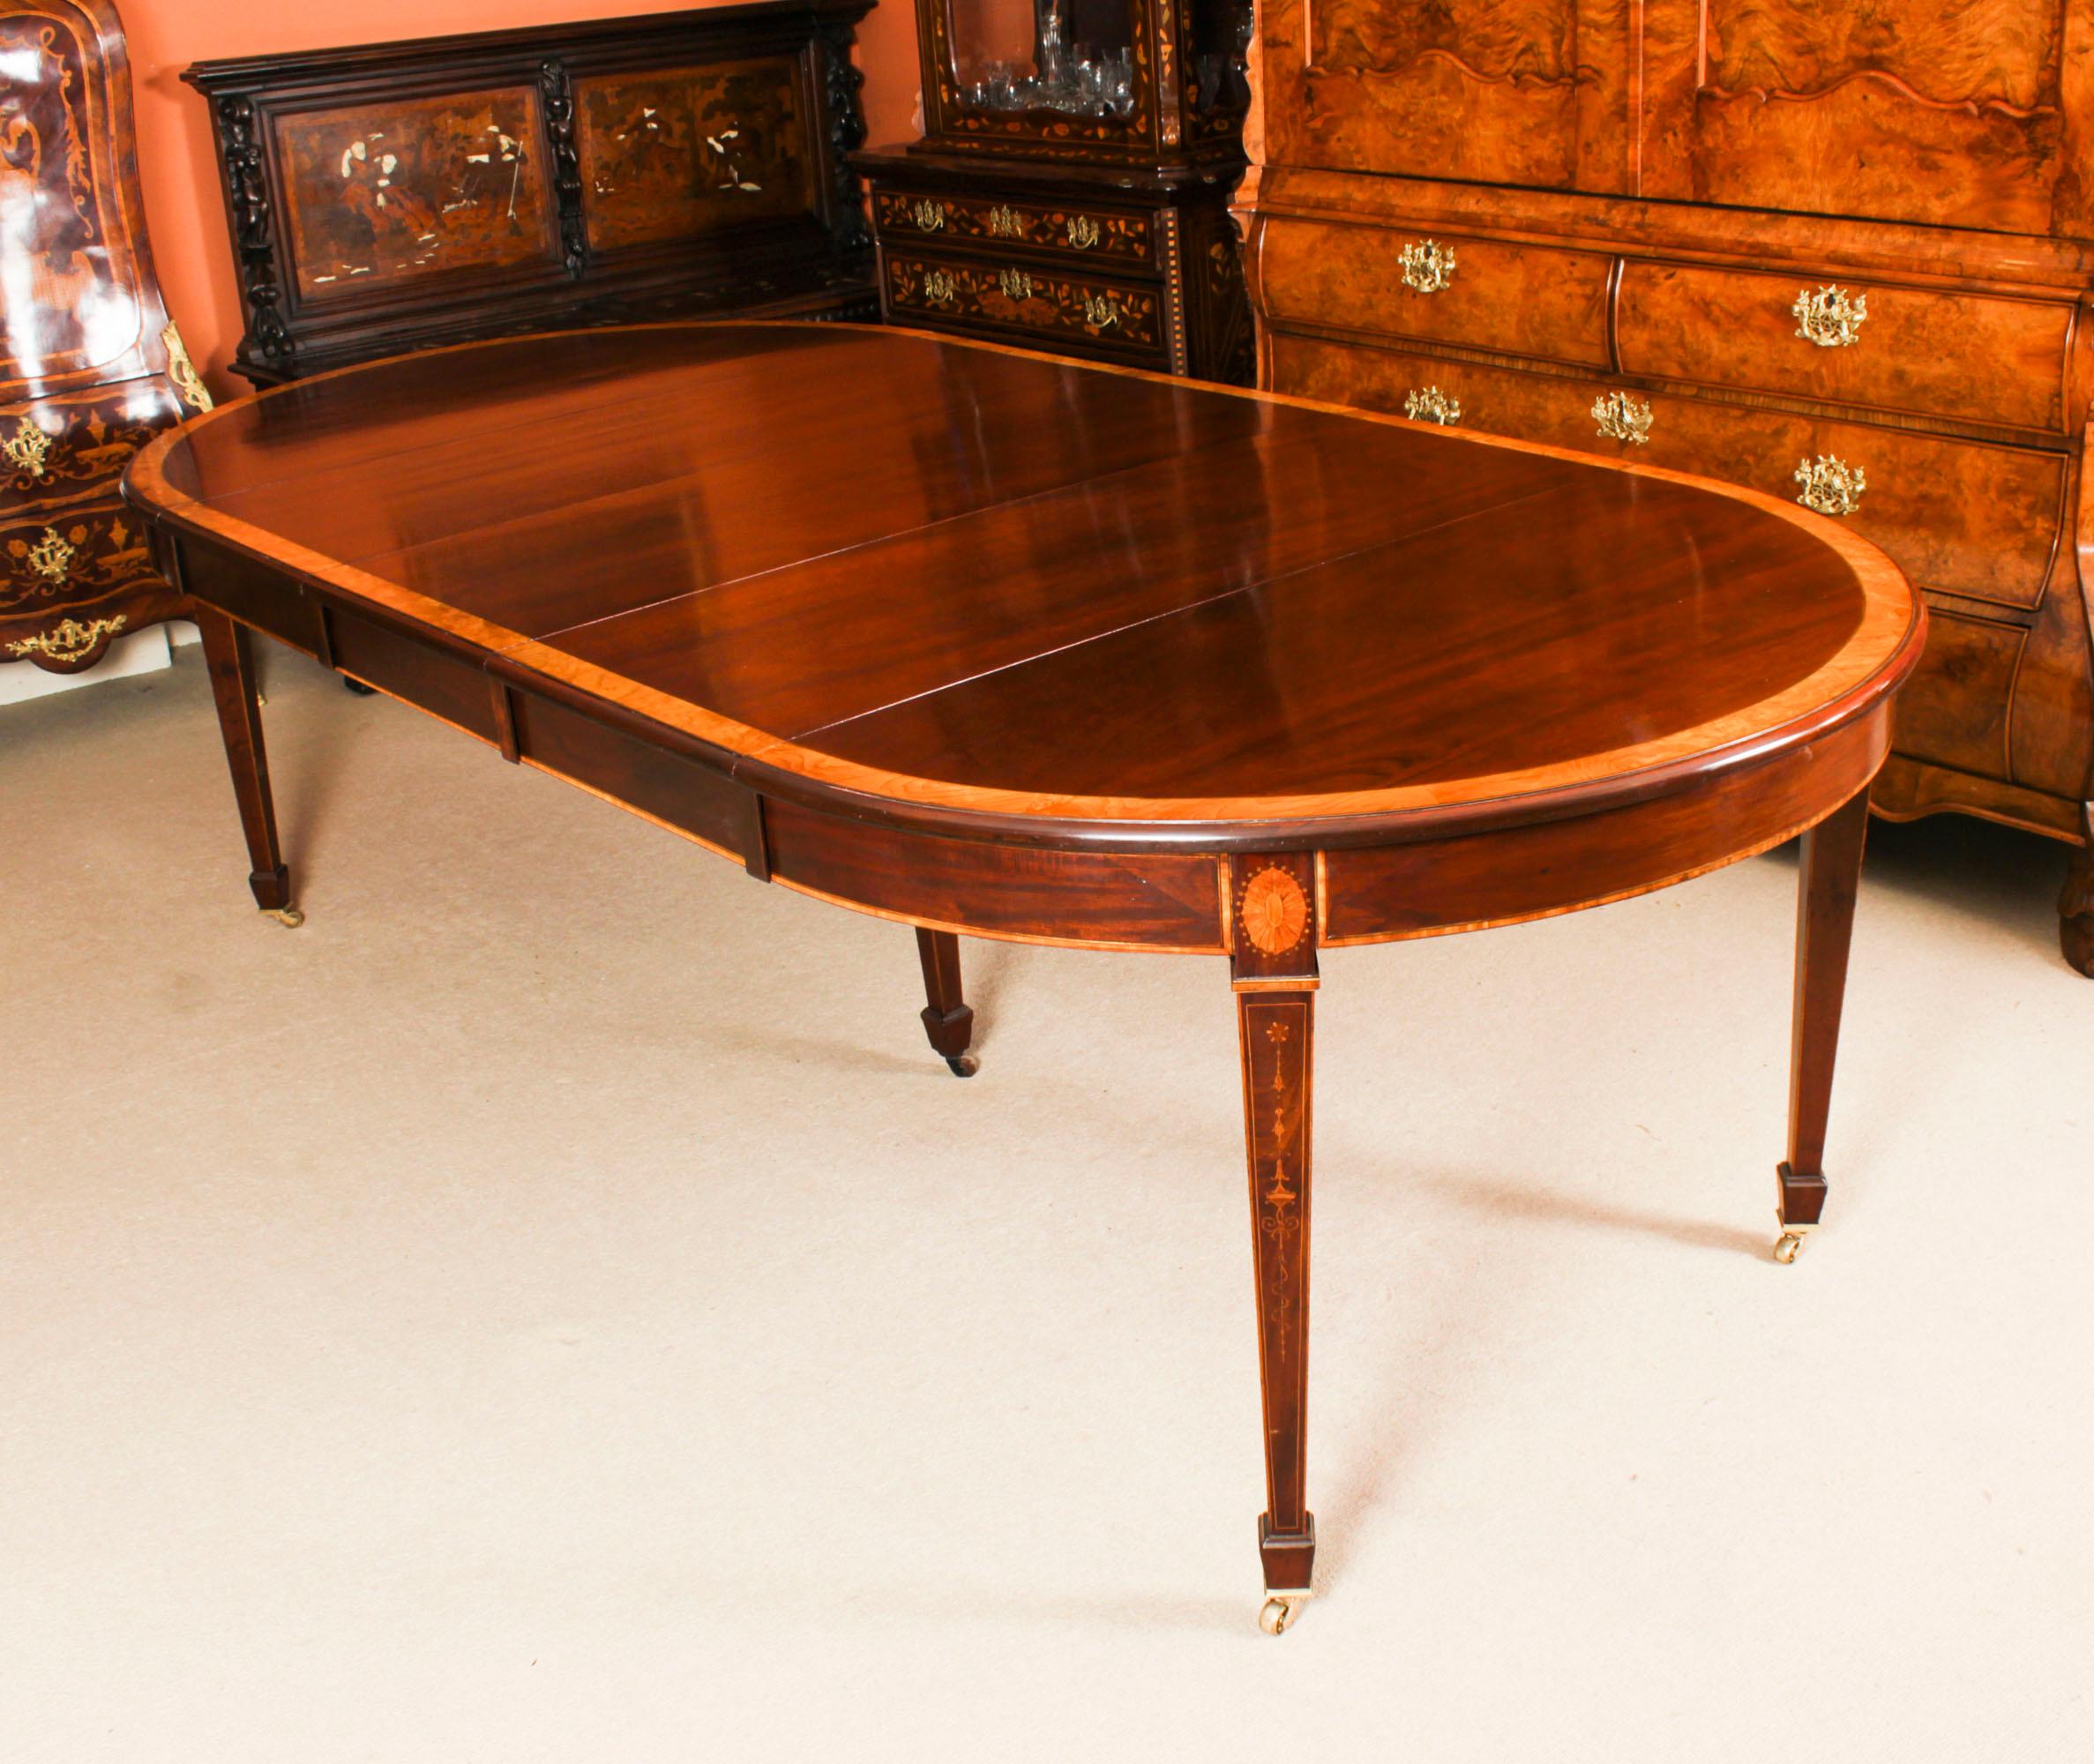 Antique Edwardian Inlaid Flame Mahogany Extending Dining Table Early 20th C. 14